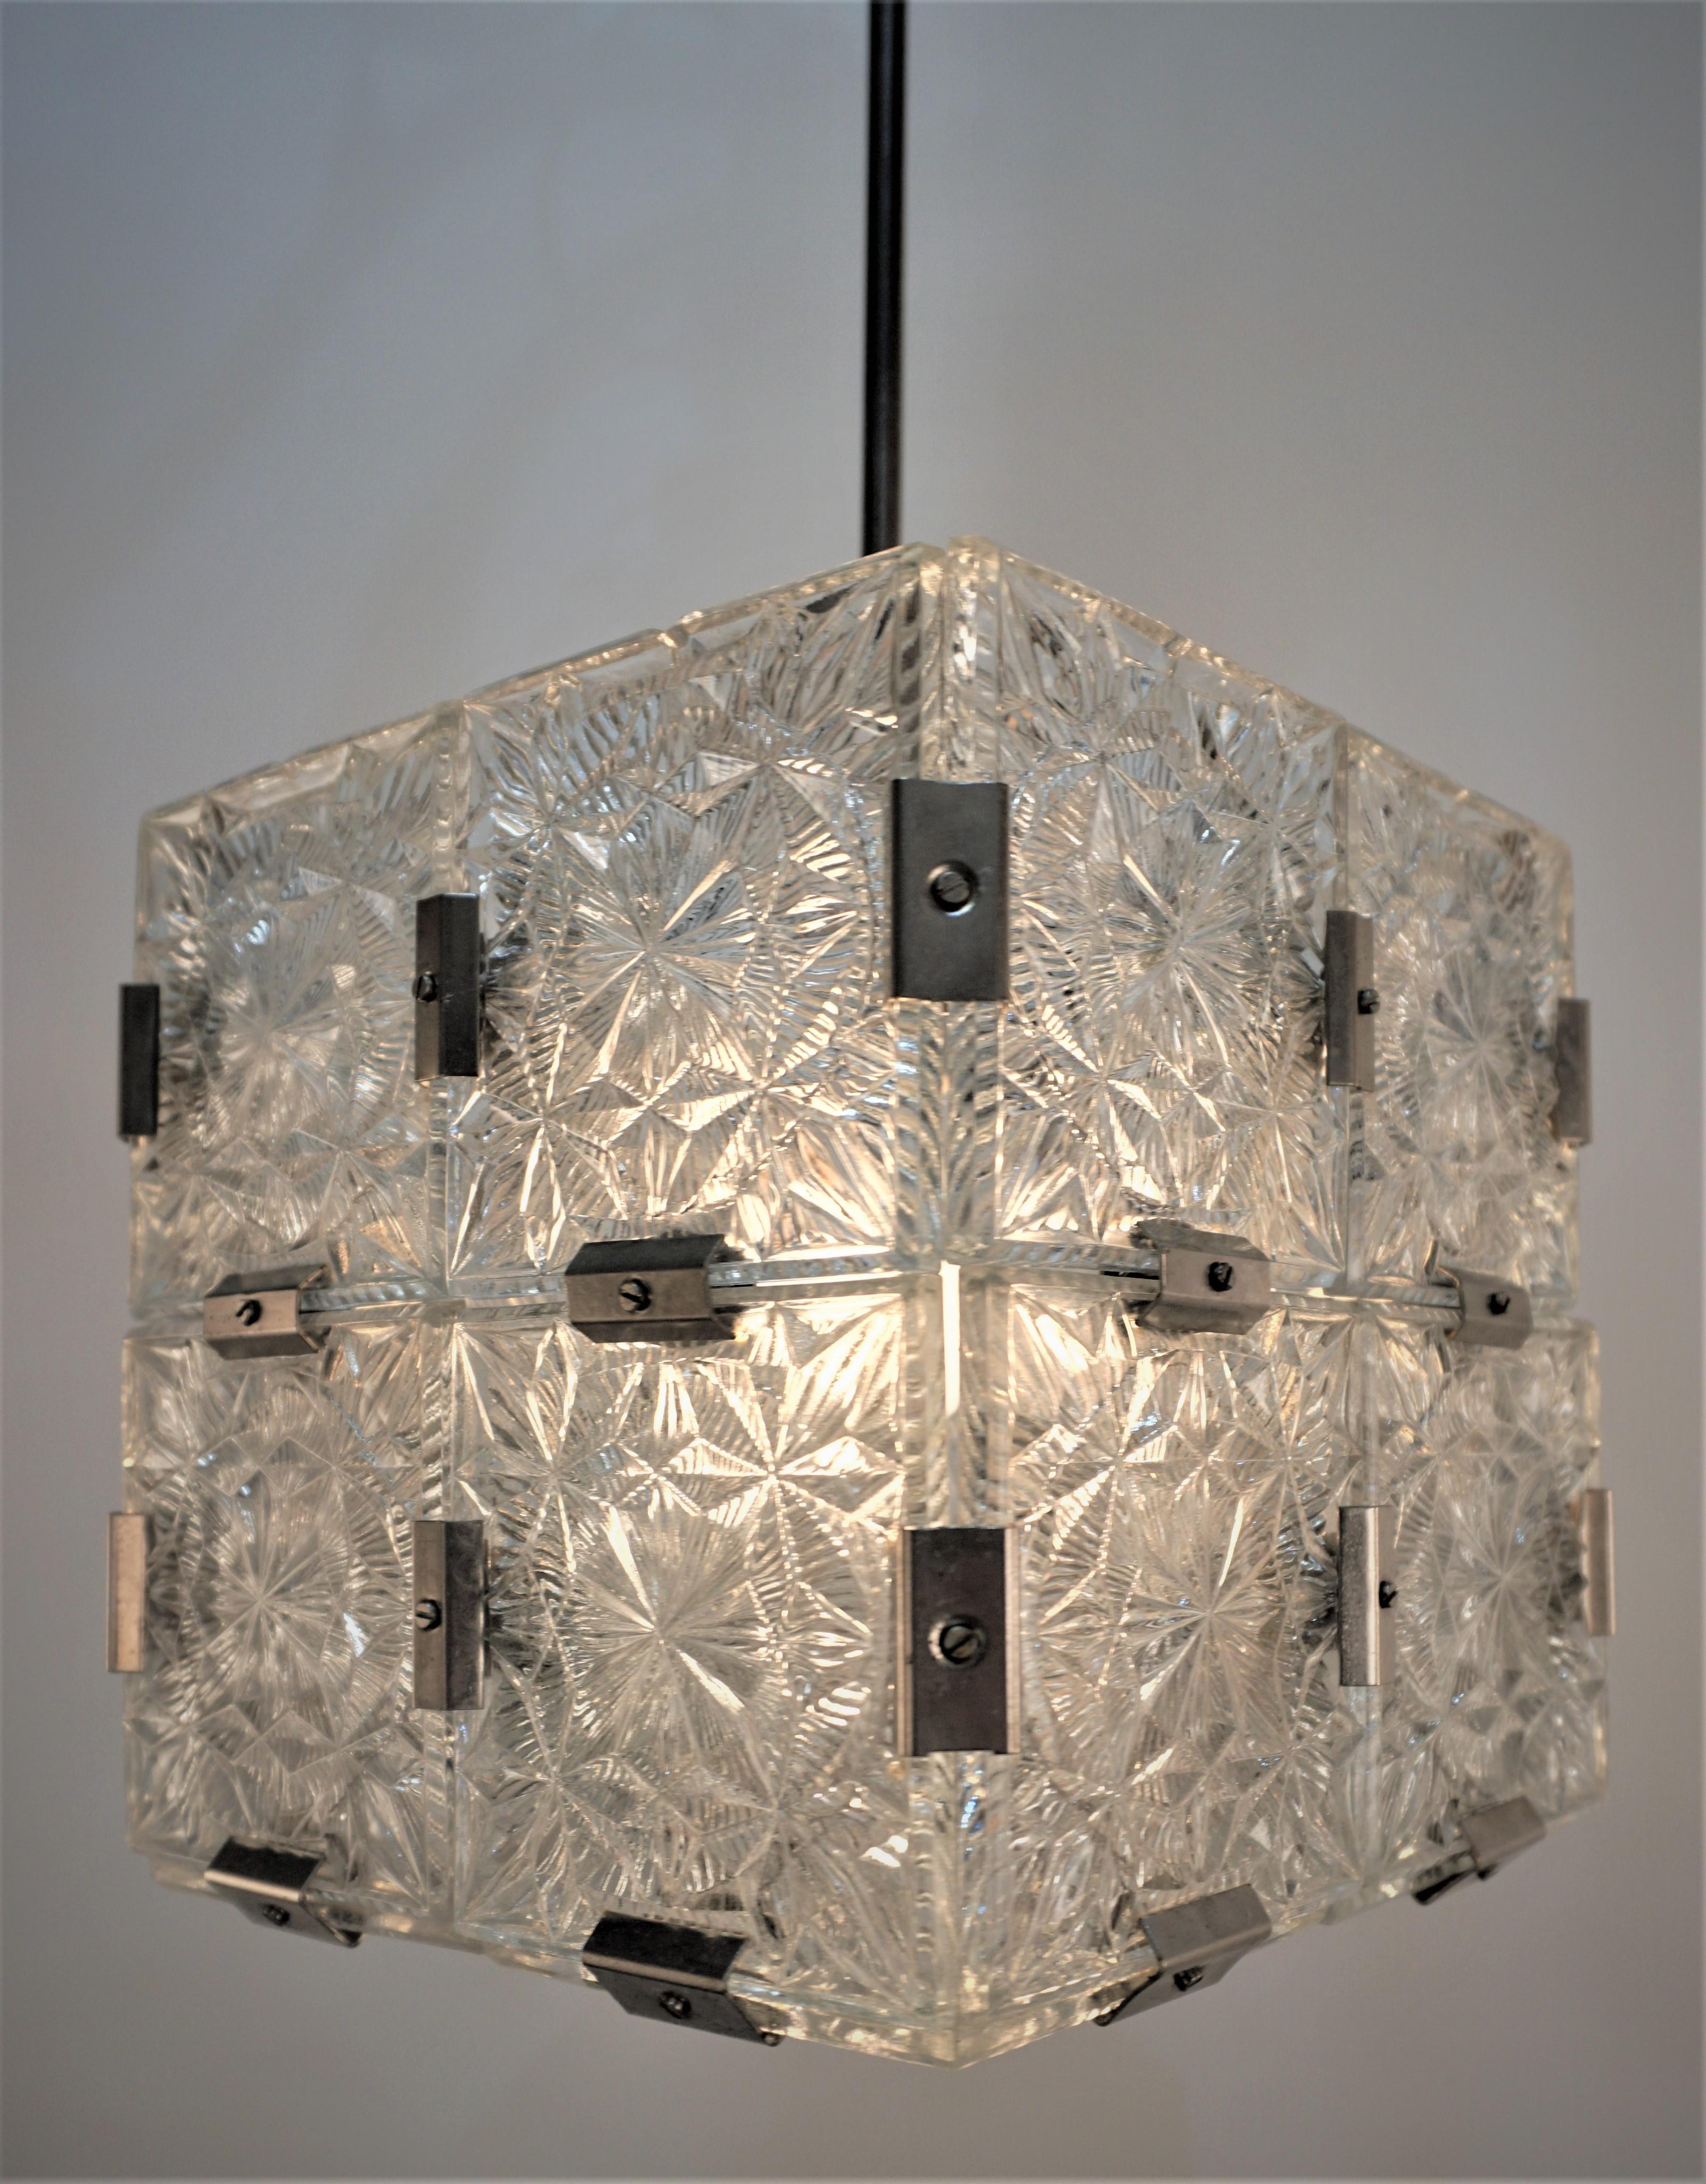 Kamenicky cube glass 1960's modernist Glass Pendant Chandelier #1 In Good Condition For Sale In Fairfax, VA